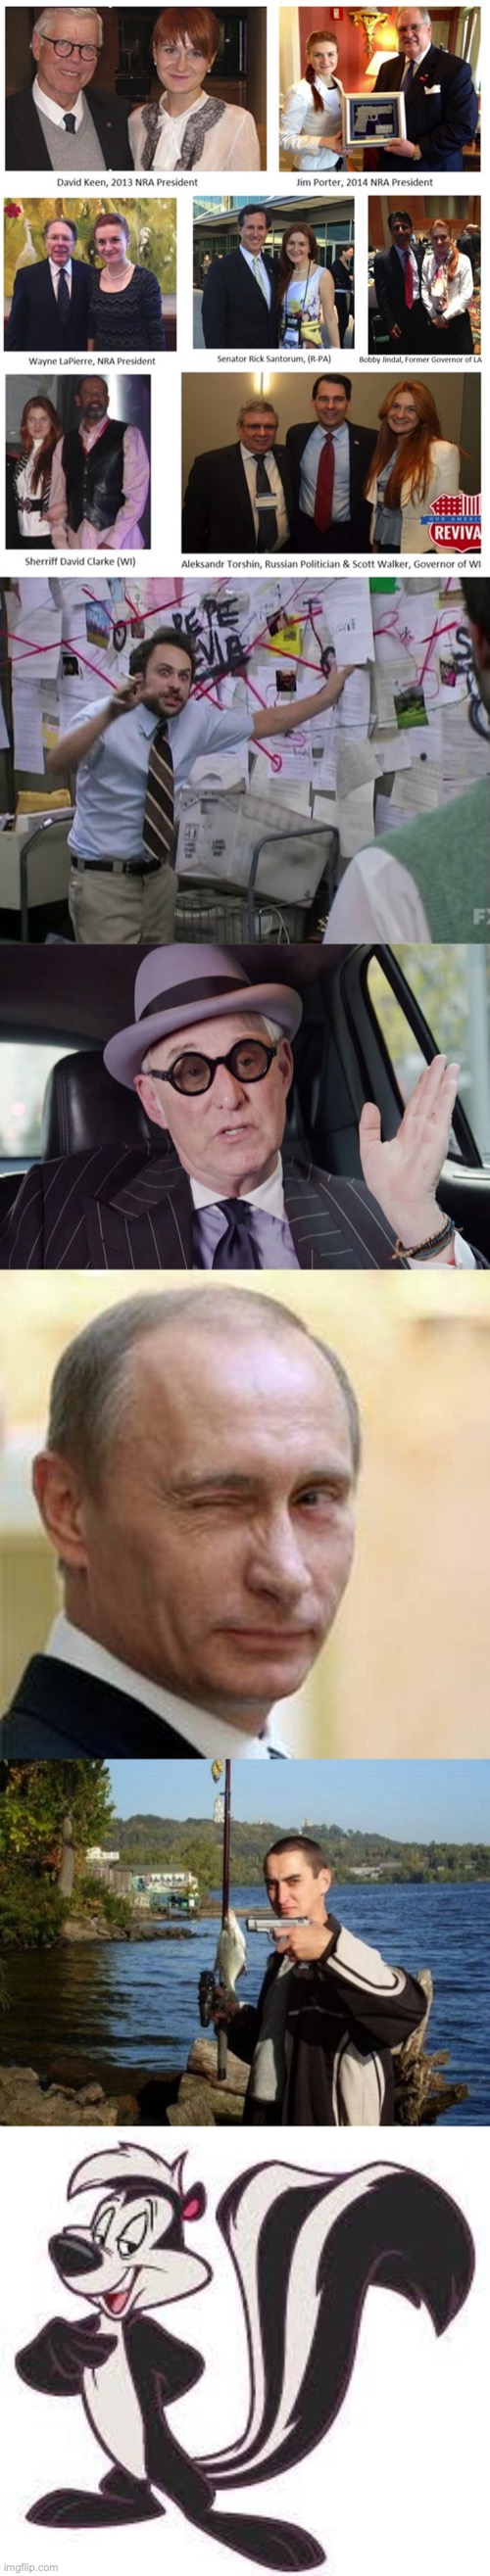 image tagged in maria butina,charlie conspiracy always sunny in philidelphia,roger stone convict,putin winking,russian gangster | made w/ Imgflip meme maker